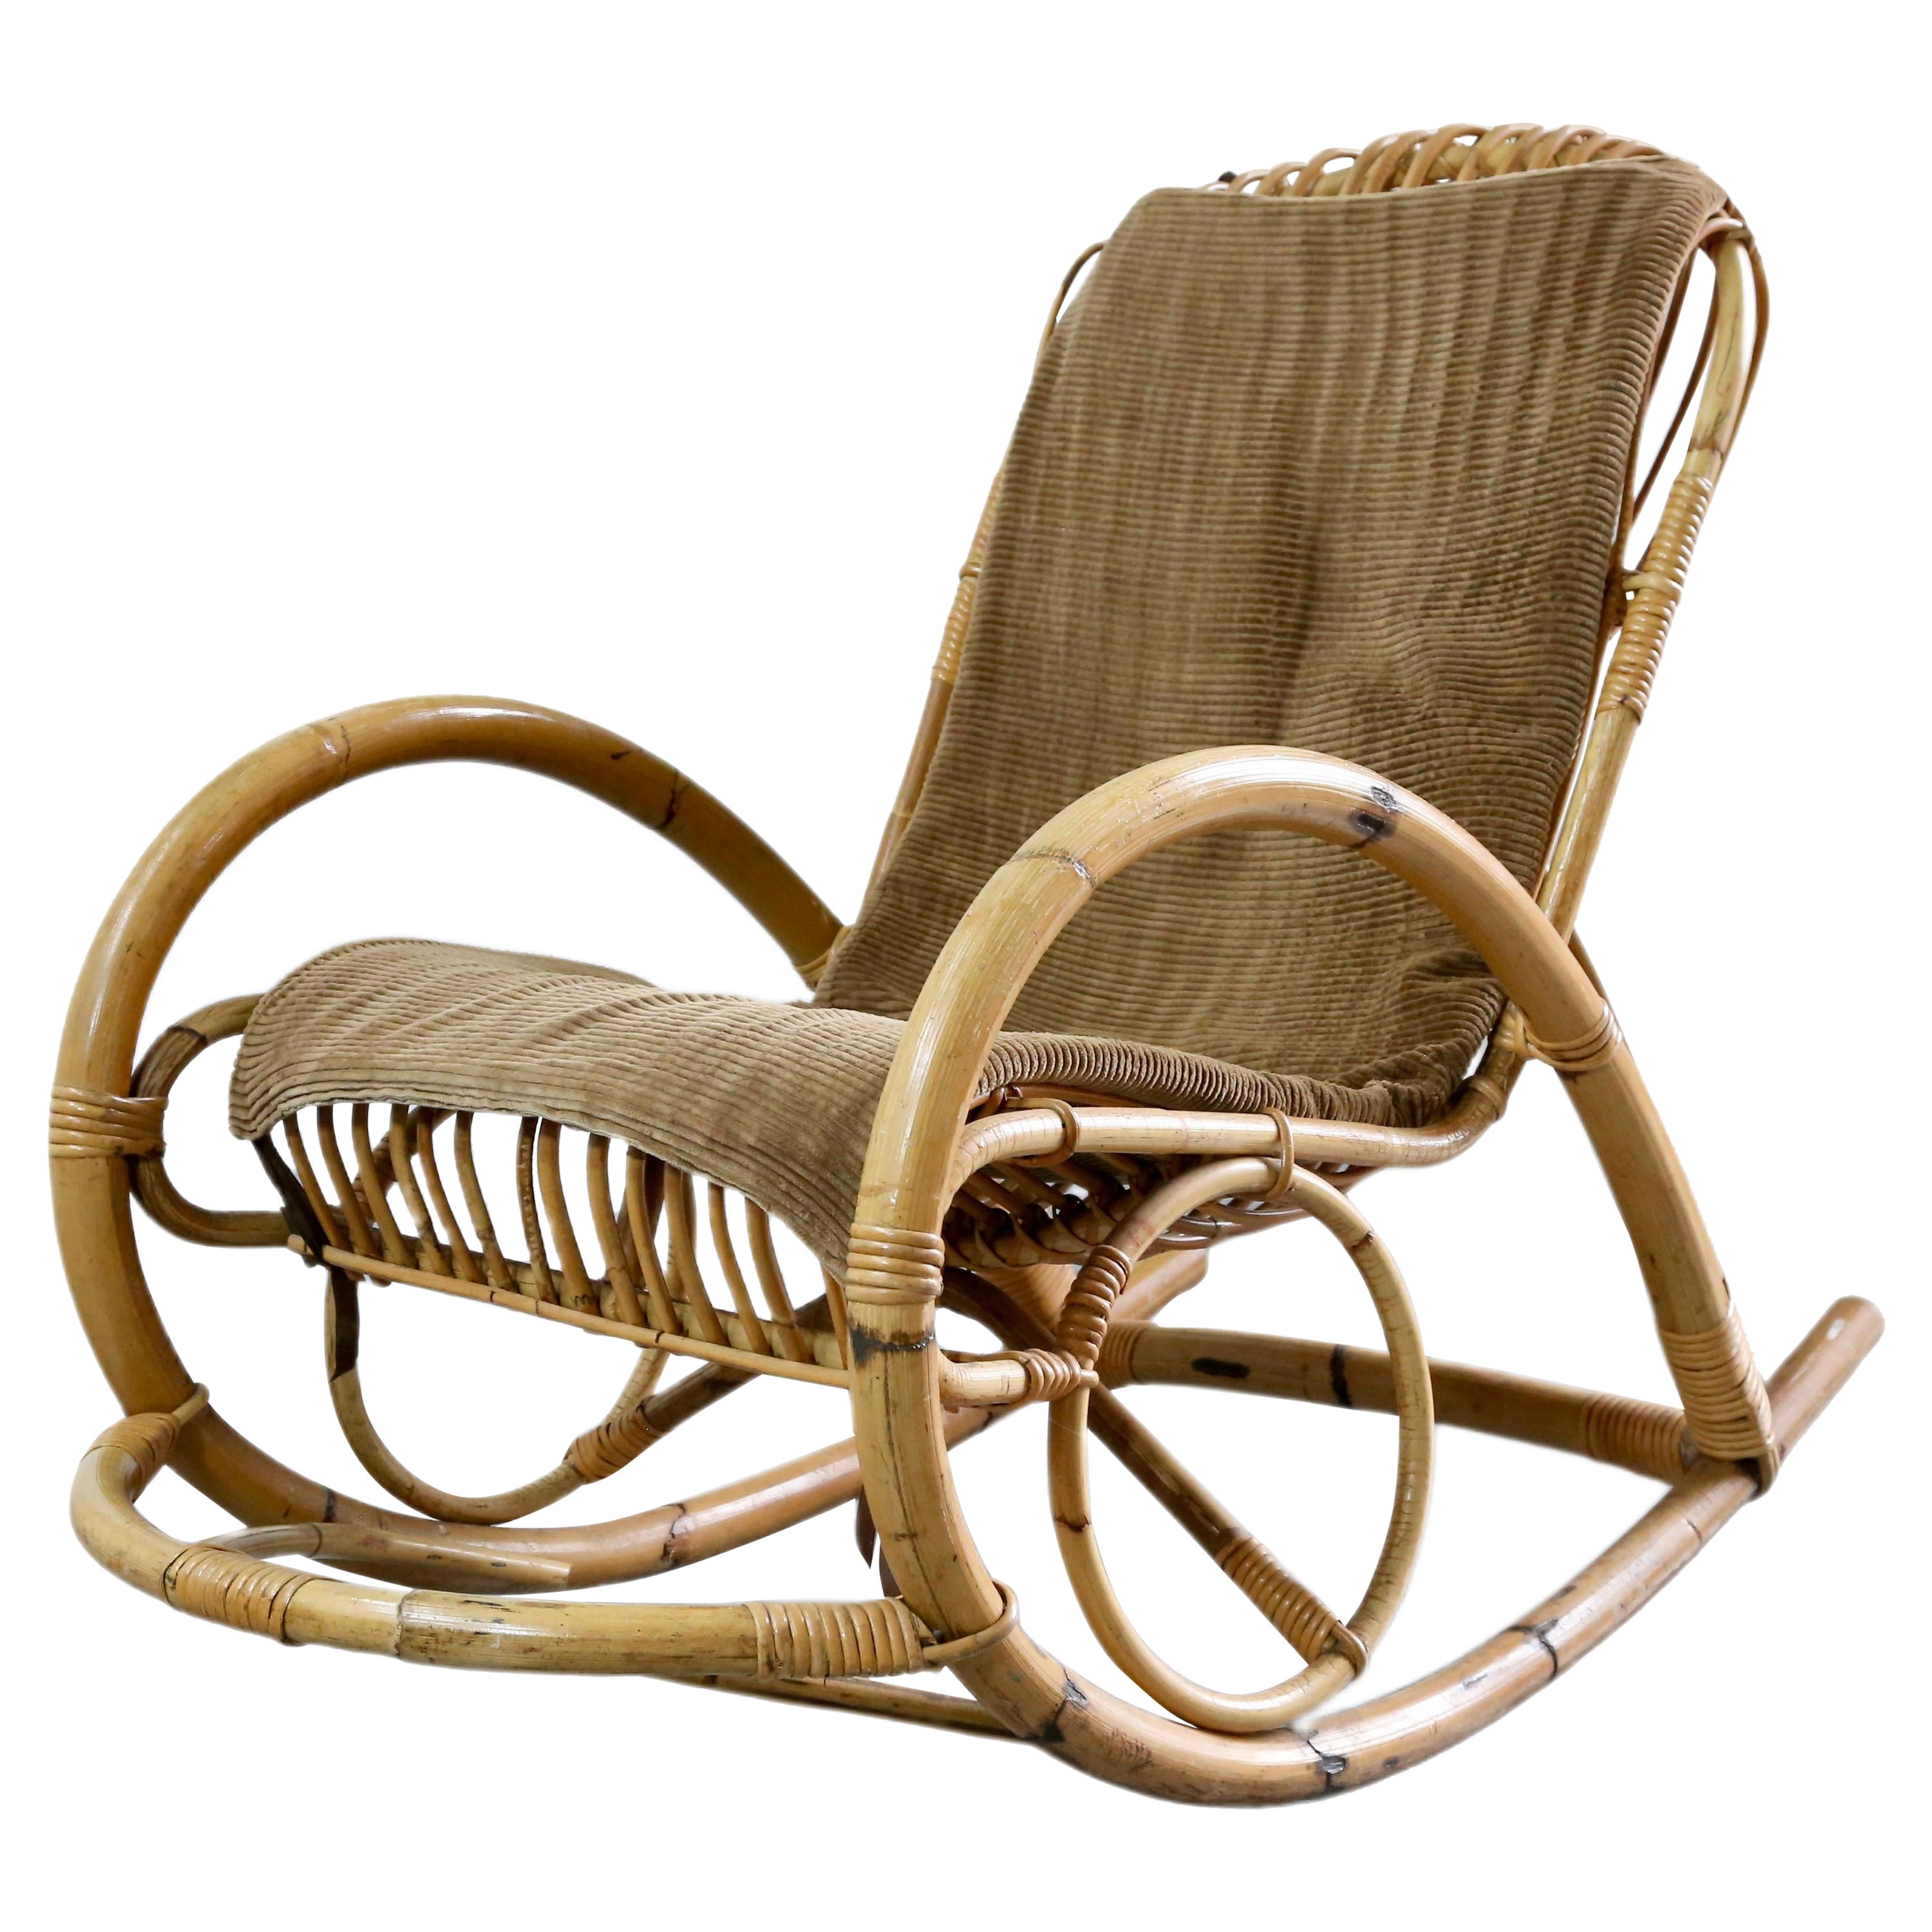 Boho Style Bamboo Wicker Rocking Chair By Dirk Van Sliedregt For Rohe Noordwolde For Sale